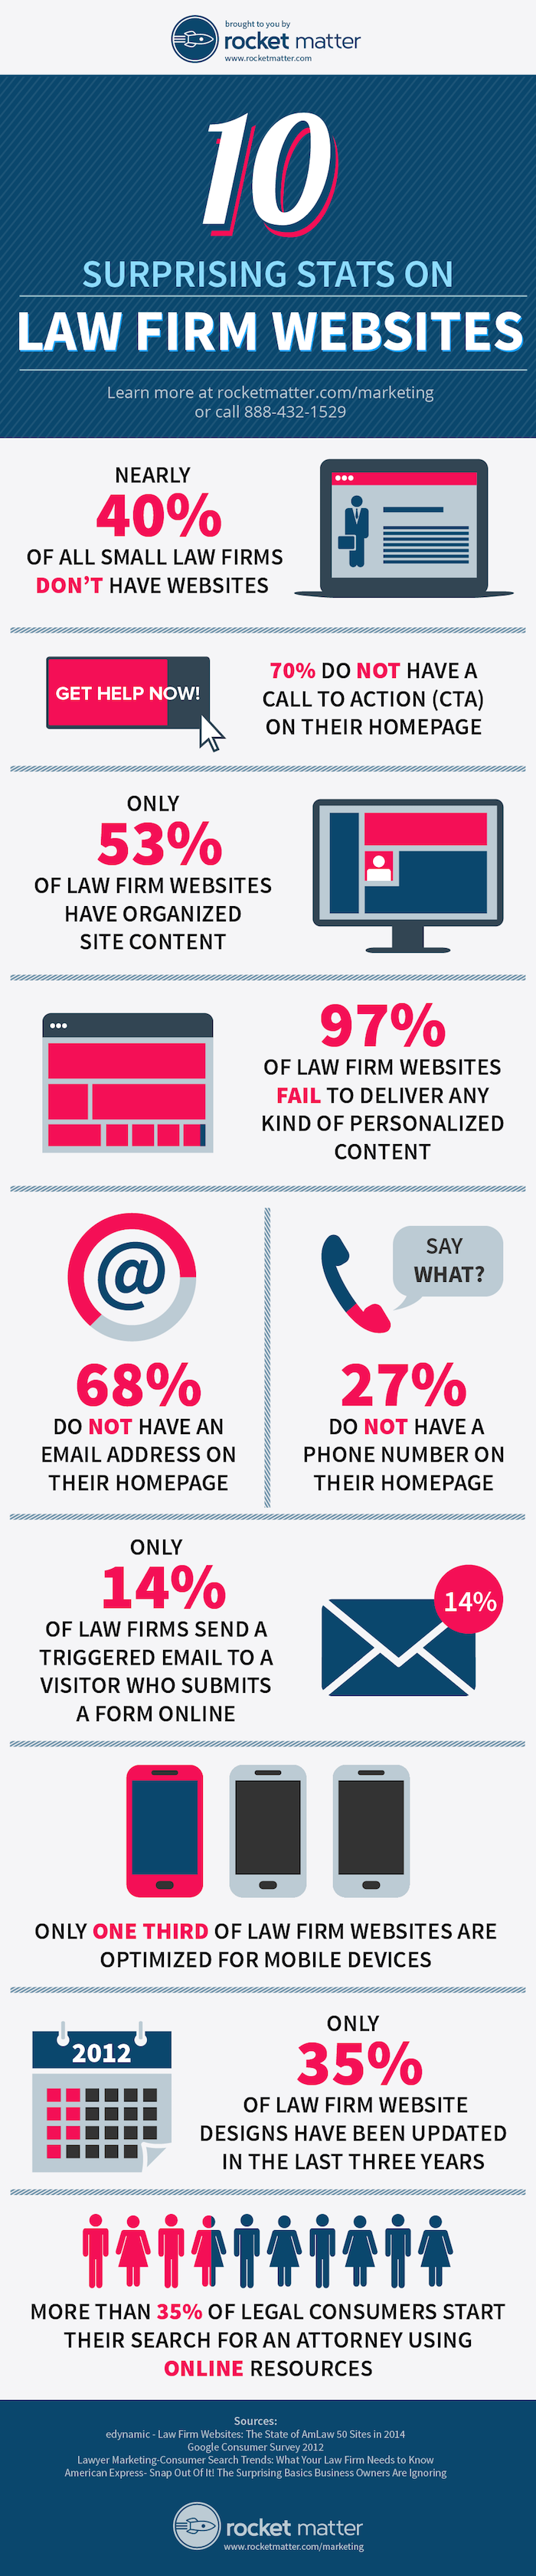 10 Surprising Stats on Law Firm Websites (Infographic)